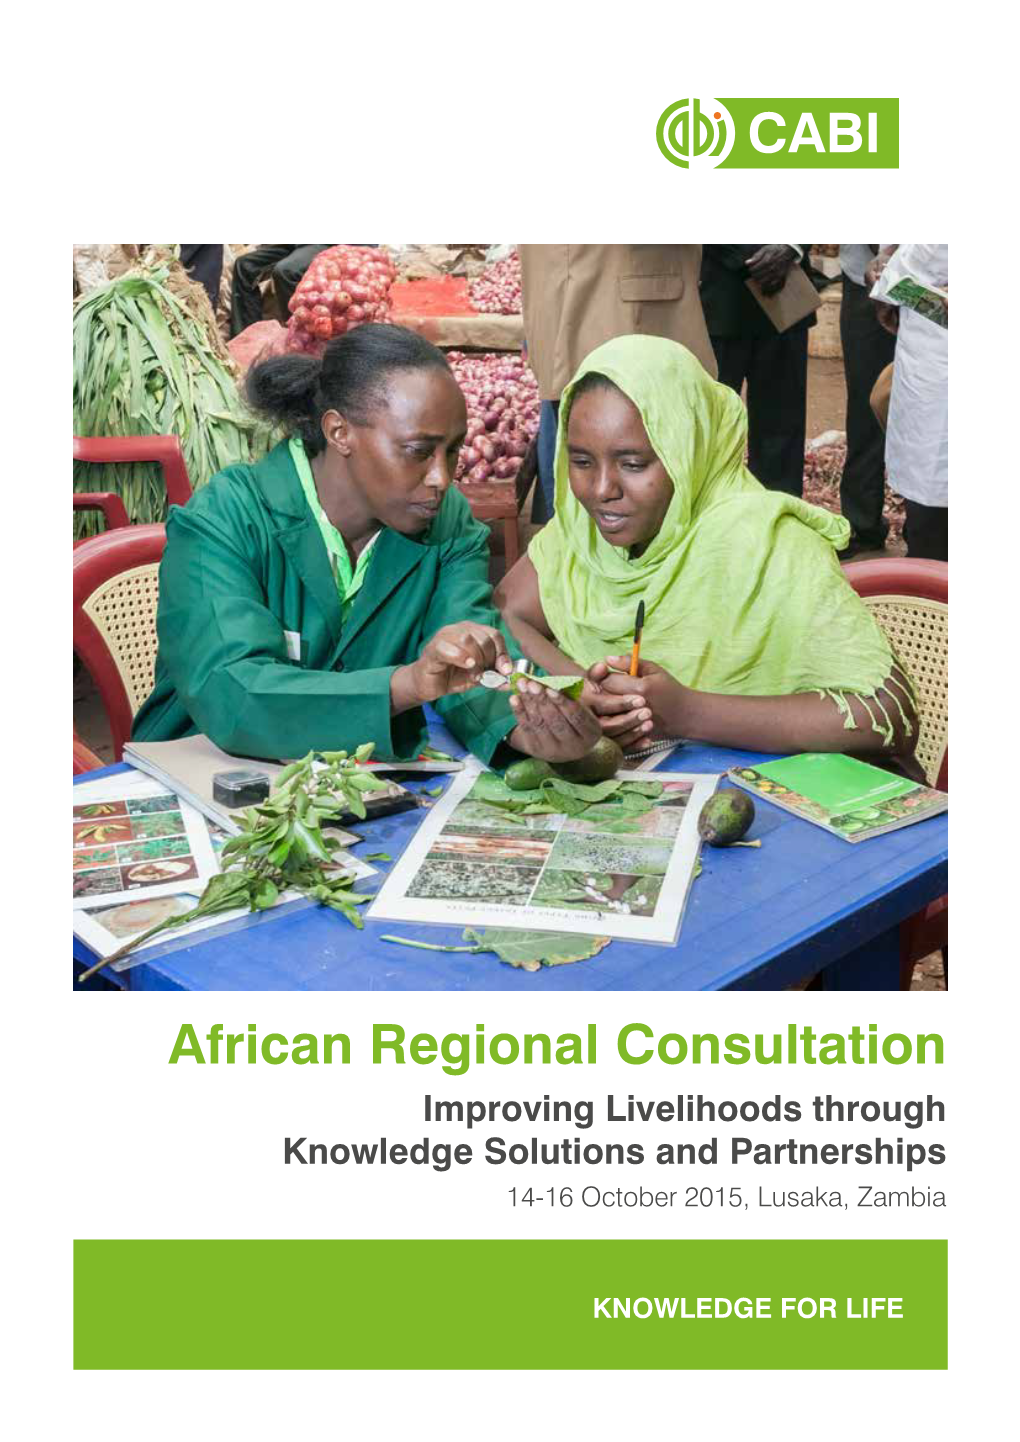 African Regional Consultation Improving Livelihoods Through Knowledge Solutions and Partnerships 14-16 October 2015, Lusaka, Zambia